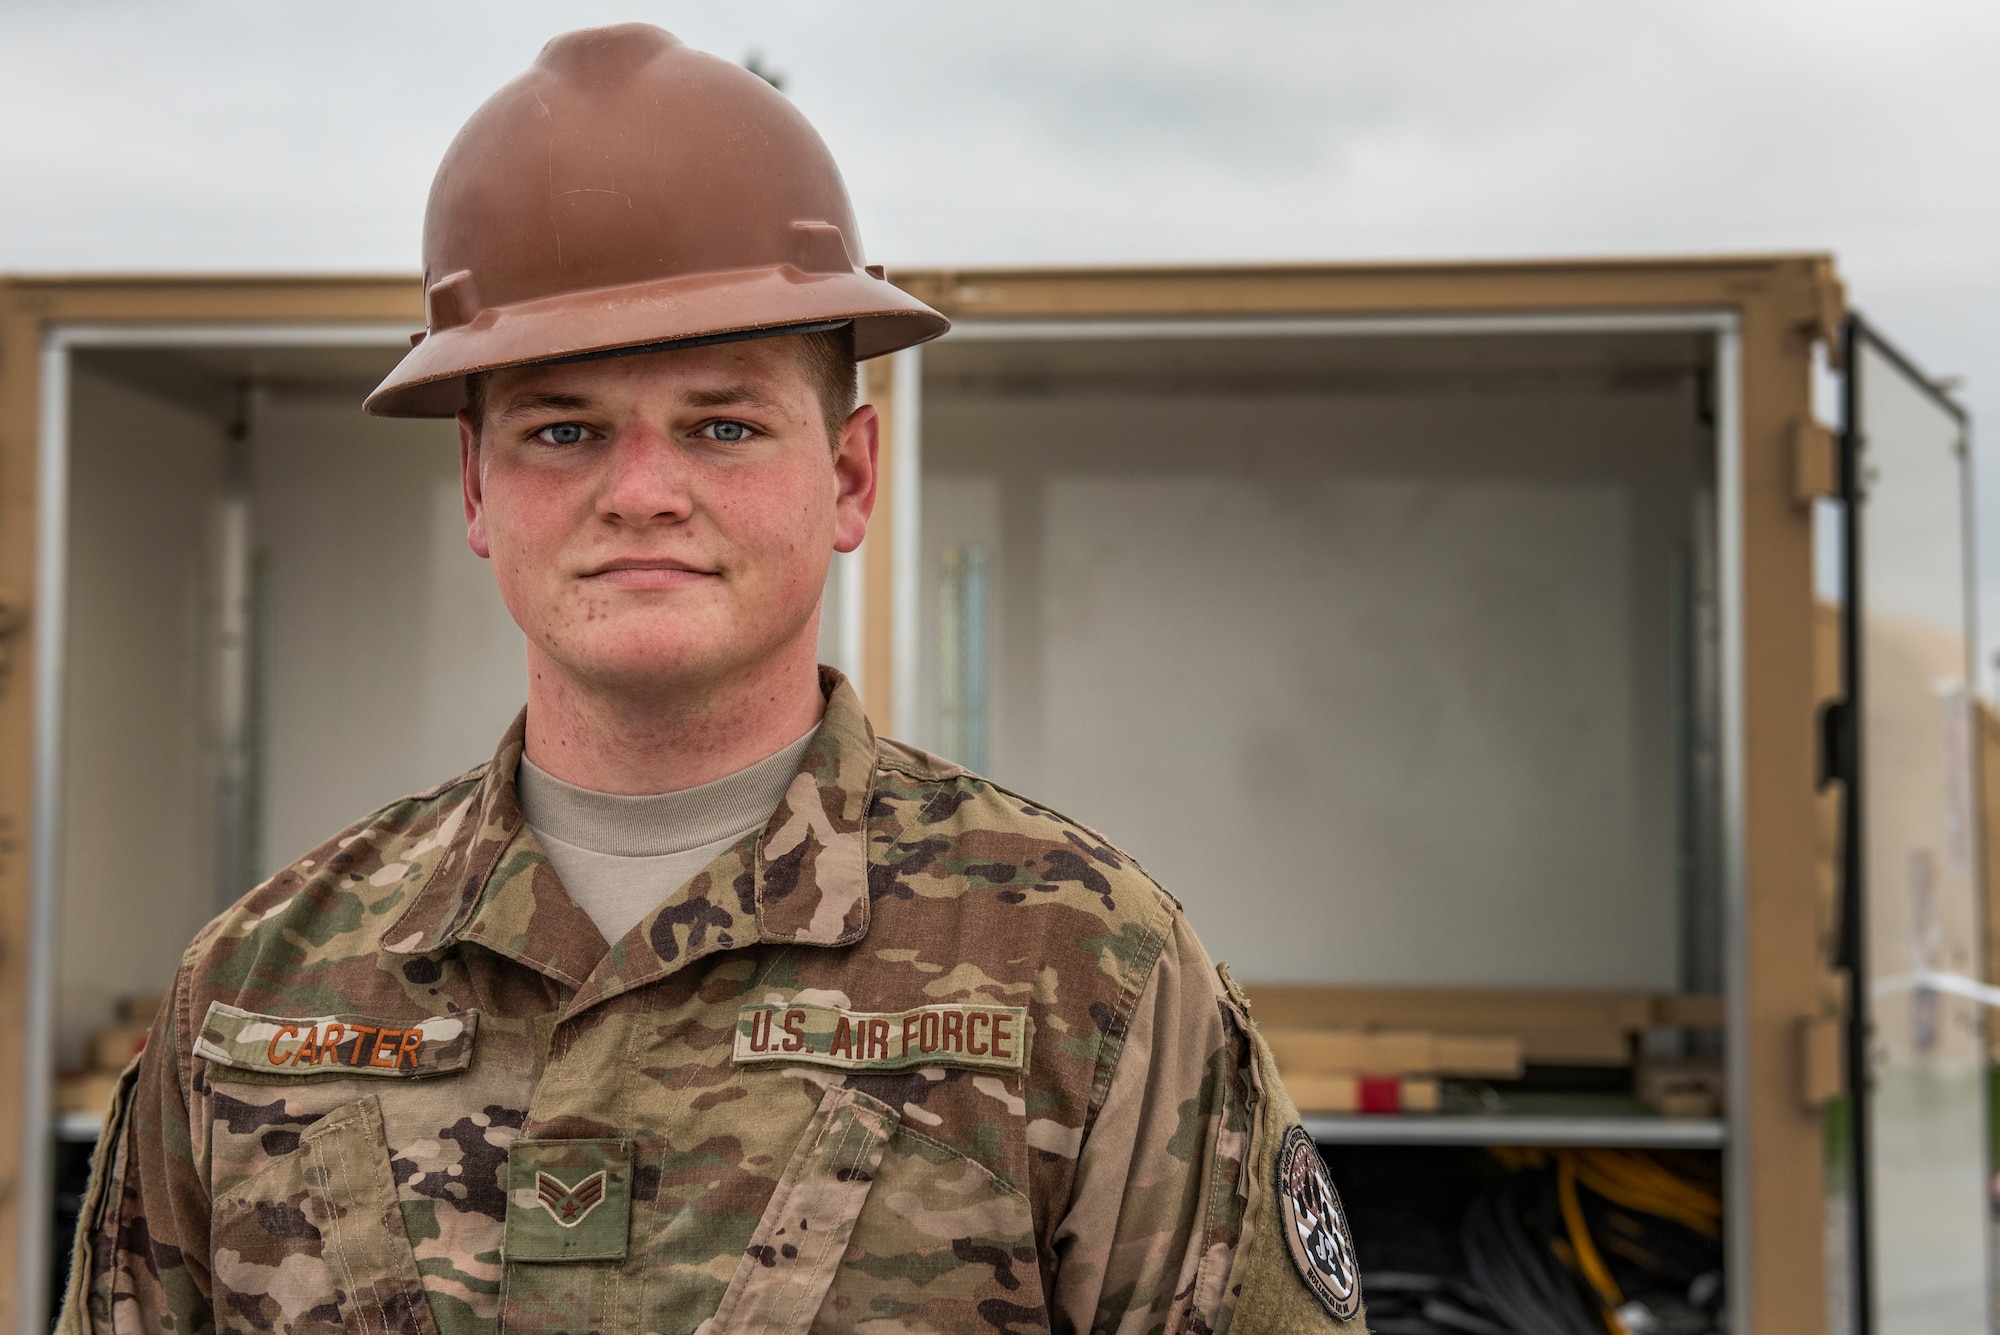 U.S. Air Force Senior Airman Thomas Carter, an Airman assigned to the 635th Material Maintenance Squadron, Holloman Air Force Base, New Mexico, stands for a portrait at Tyndall Air Force Base, Fla., March 4, 2019. Carter is currently here on a temporary duty assignment to provide additional support in recovery efforts to help rebuild Tyndall. (U.S. Air Force photo by Staff Sgt. Alexandre Montes)